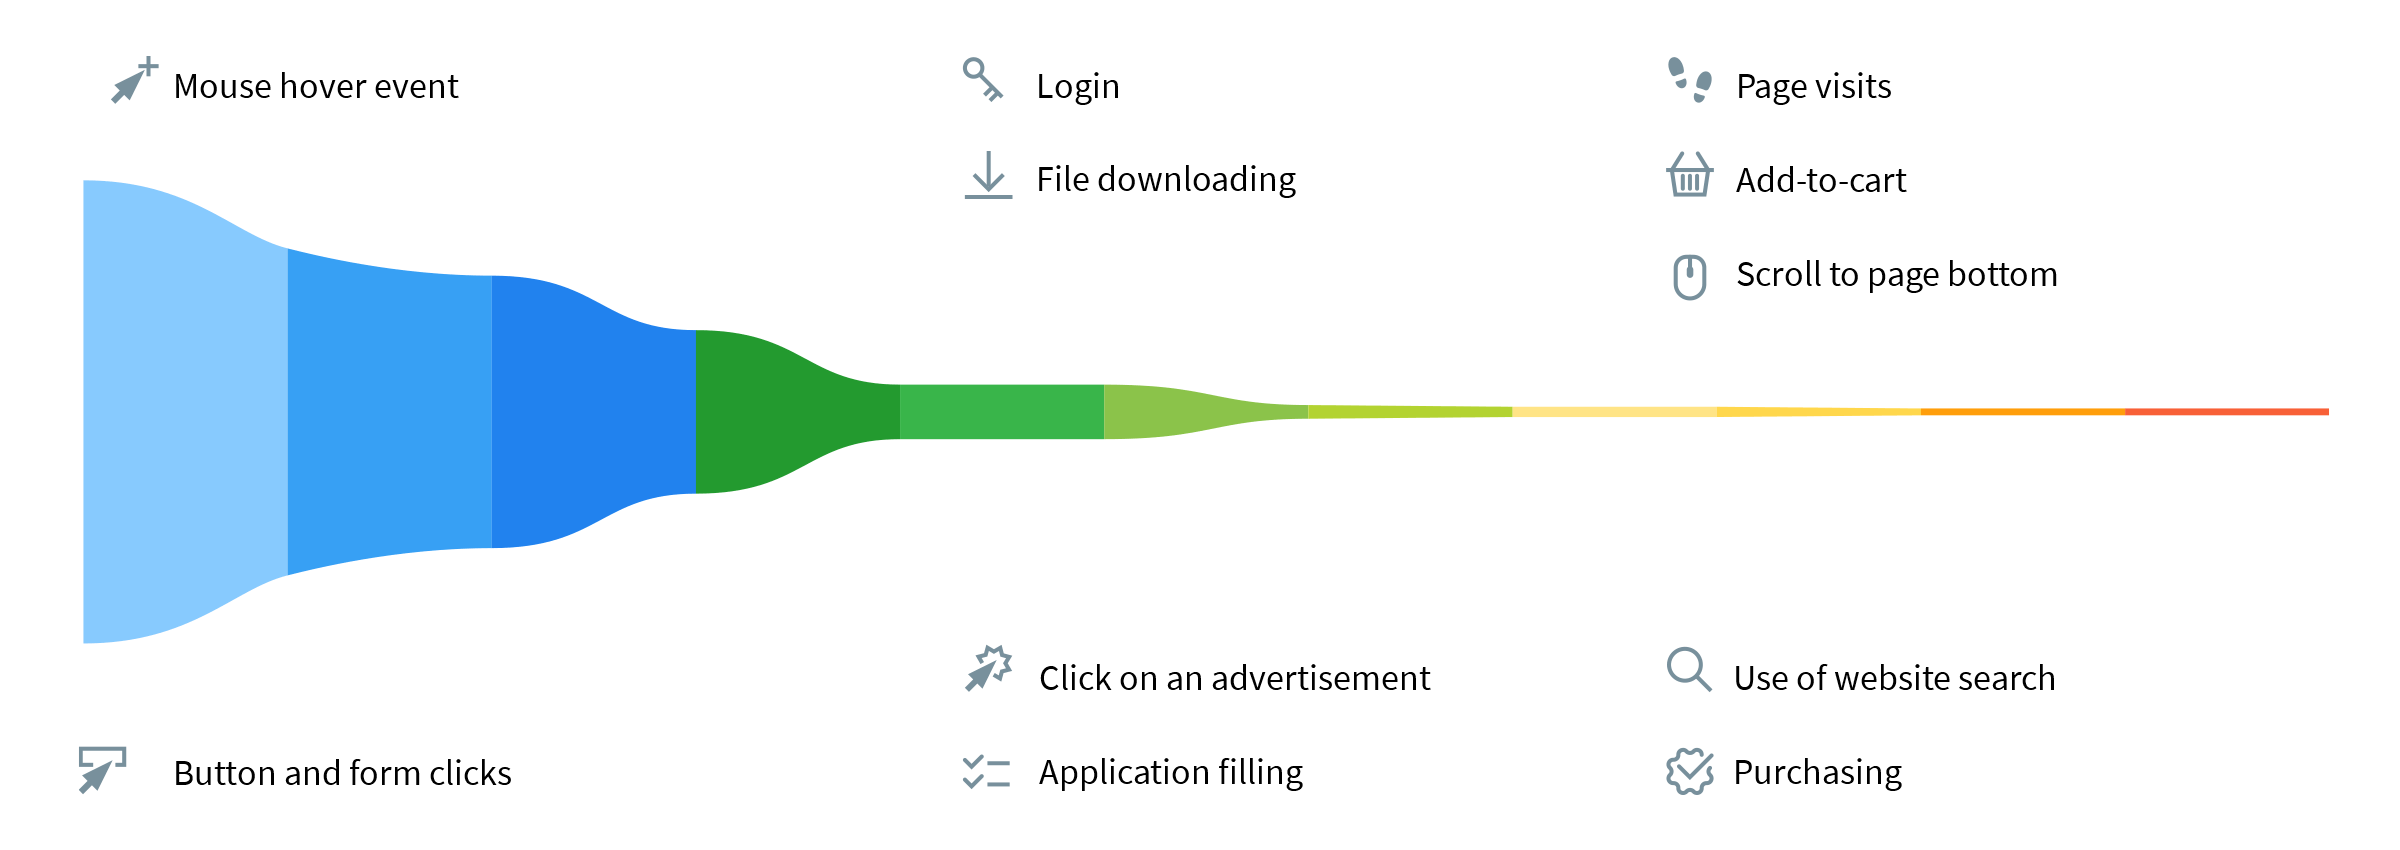 What criteria can be implemented in a funnel?